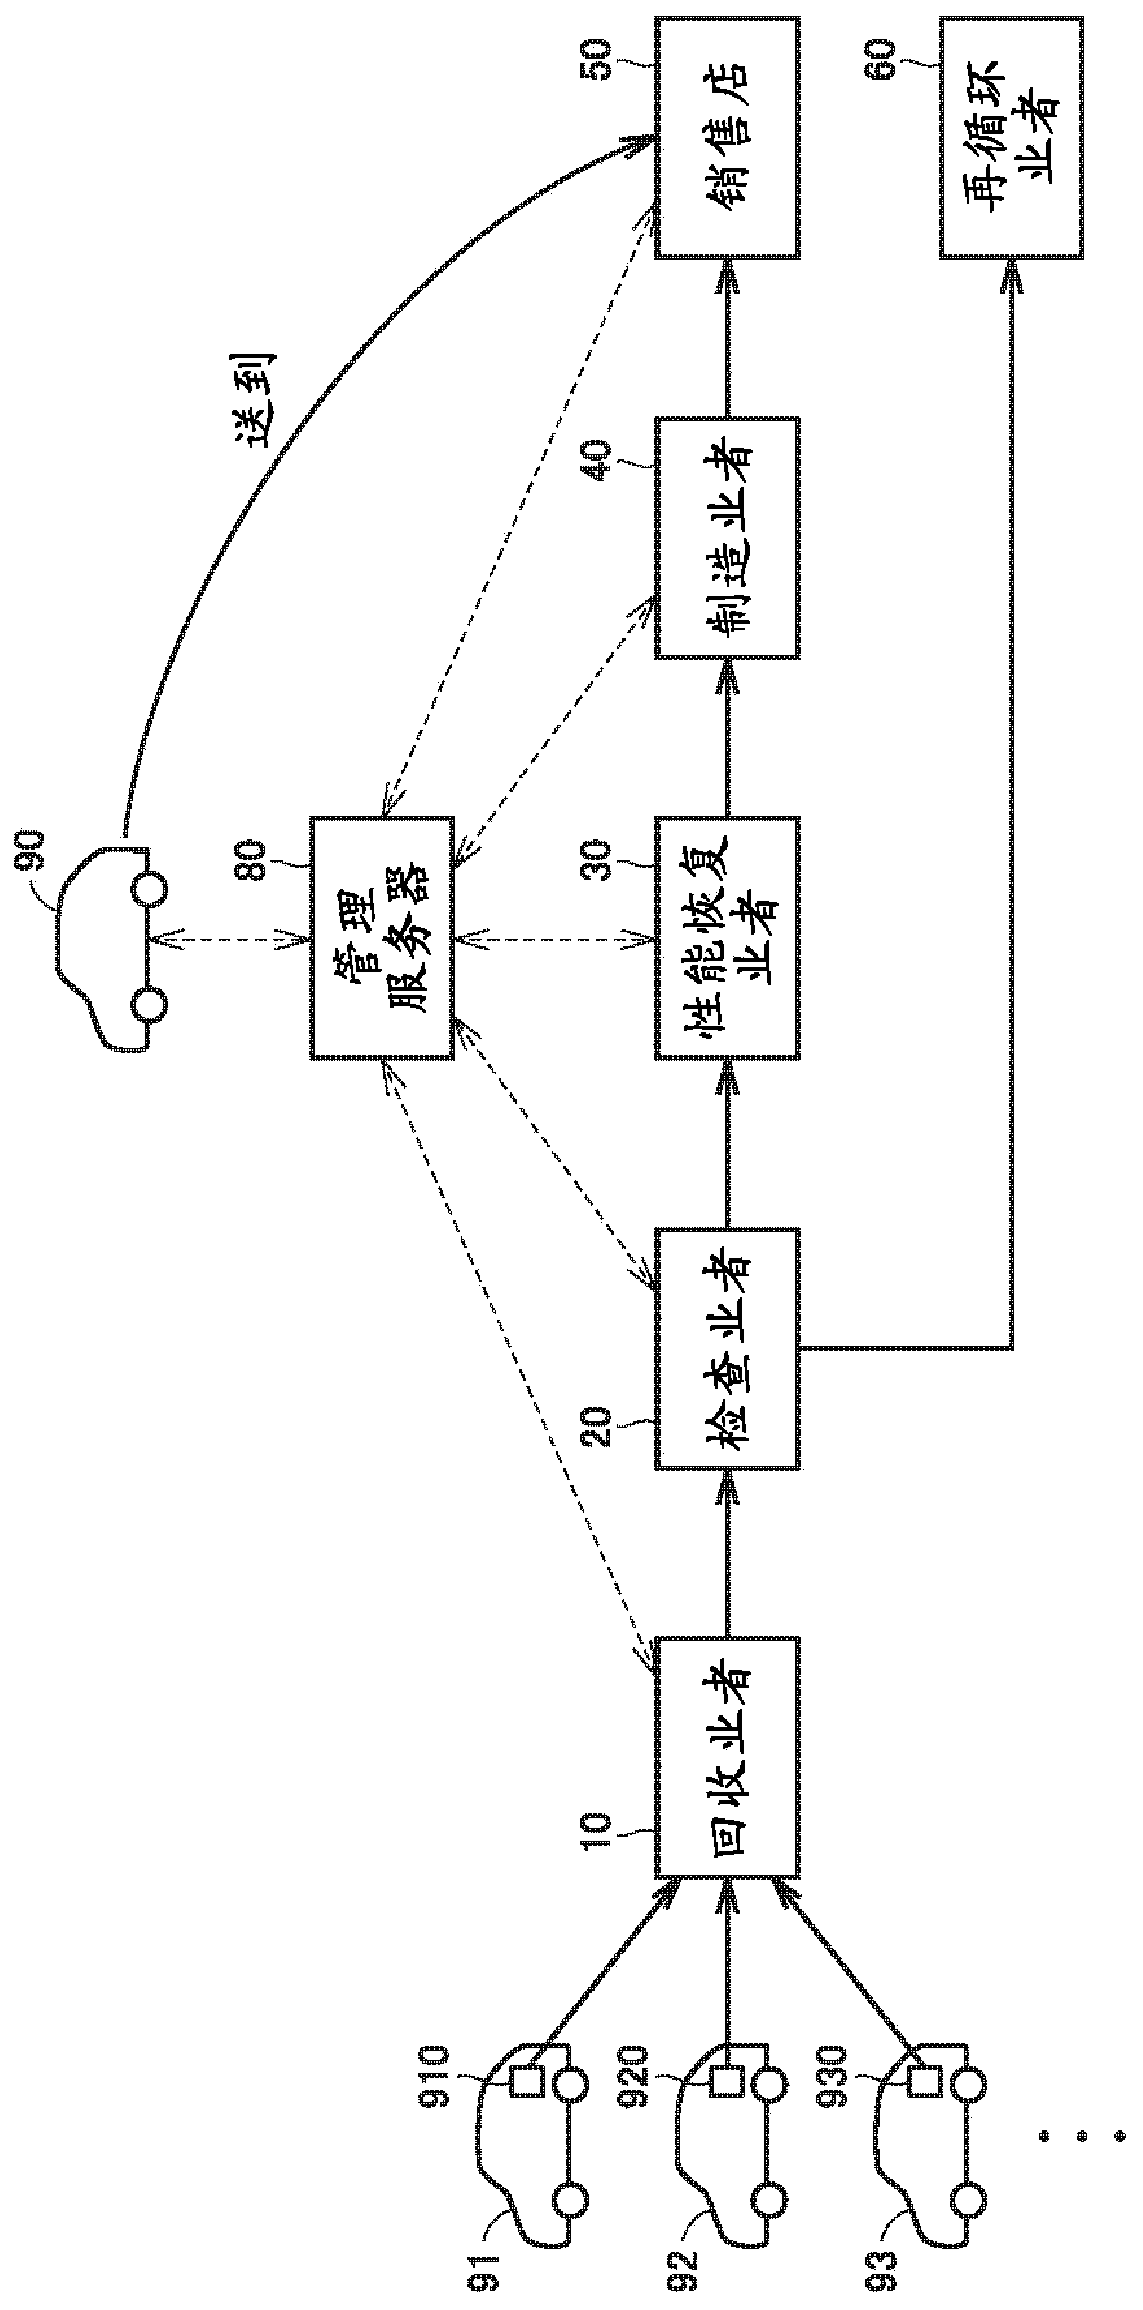 Battery information processing system, battery assembly, method of evaluating characteristics of battery module, and method of manufacturing battery assembly